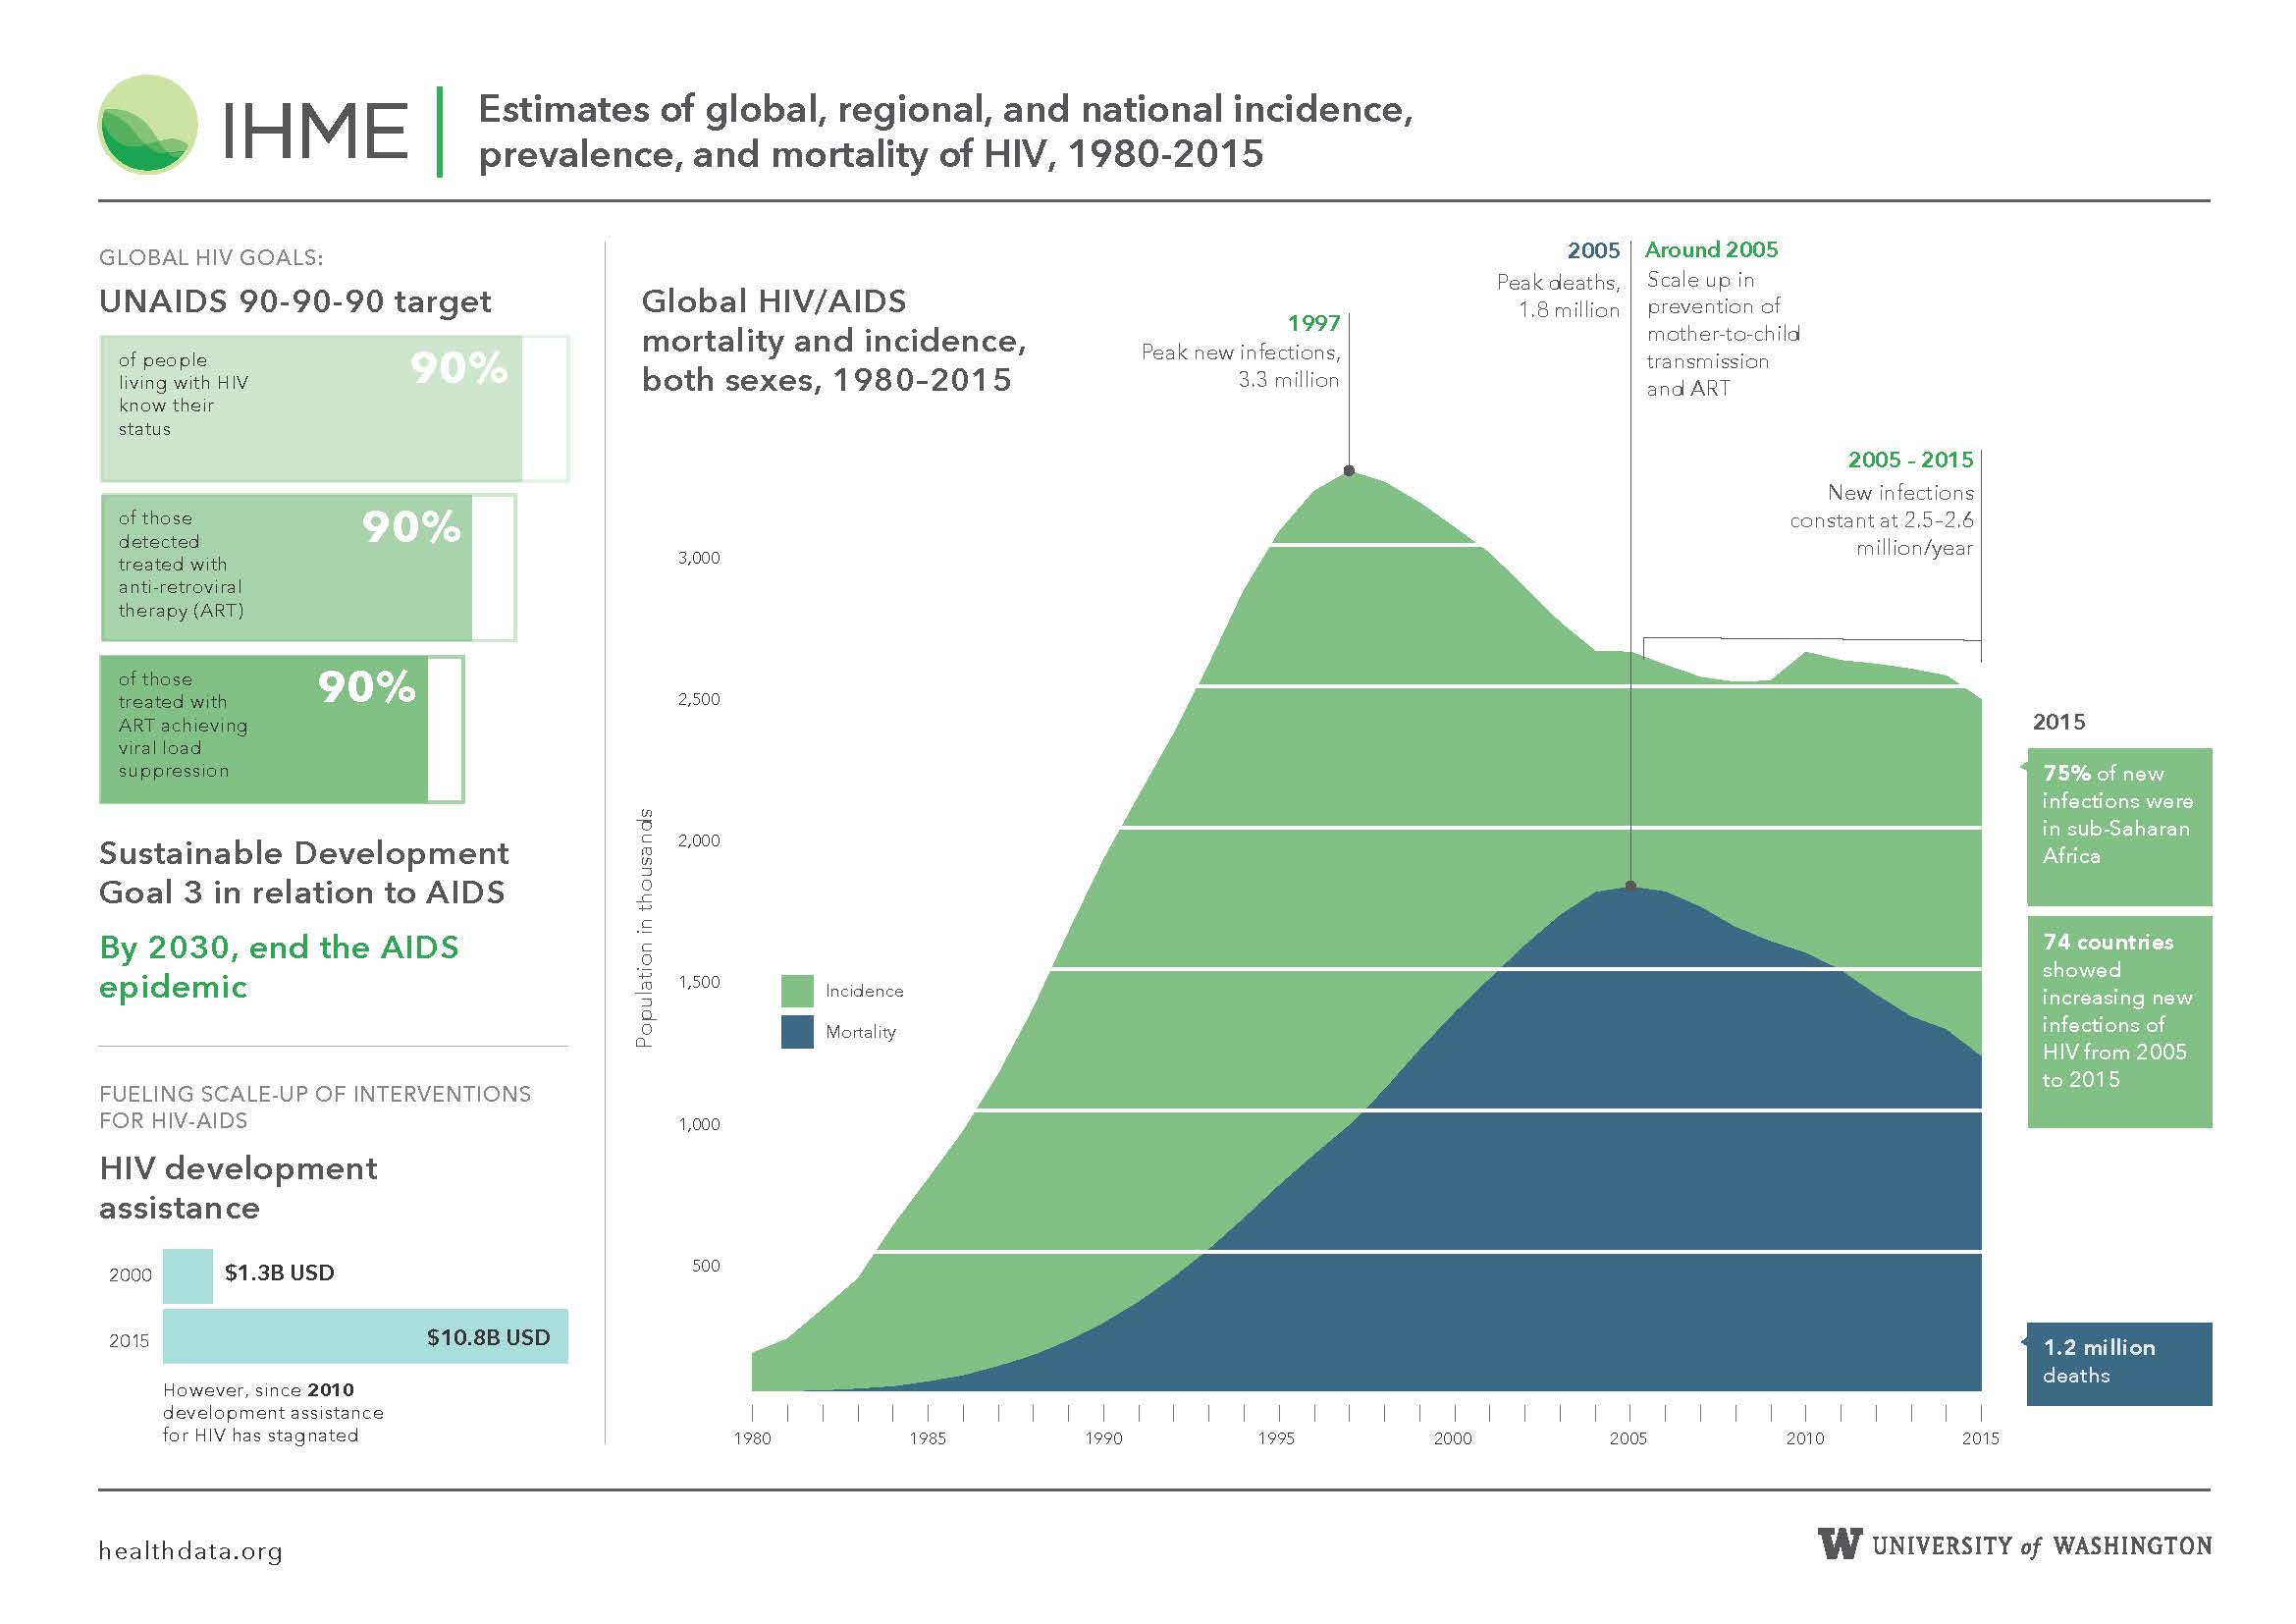 Infographic: Estimates of global, regional, and national incidence, prevalence, and mortality of HIV, 1980-2015